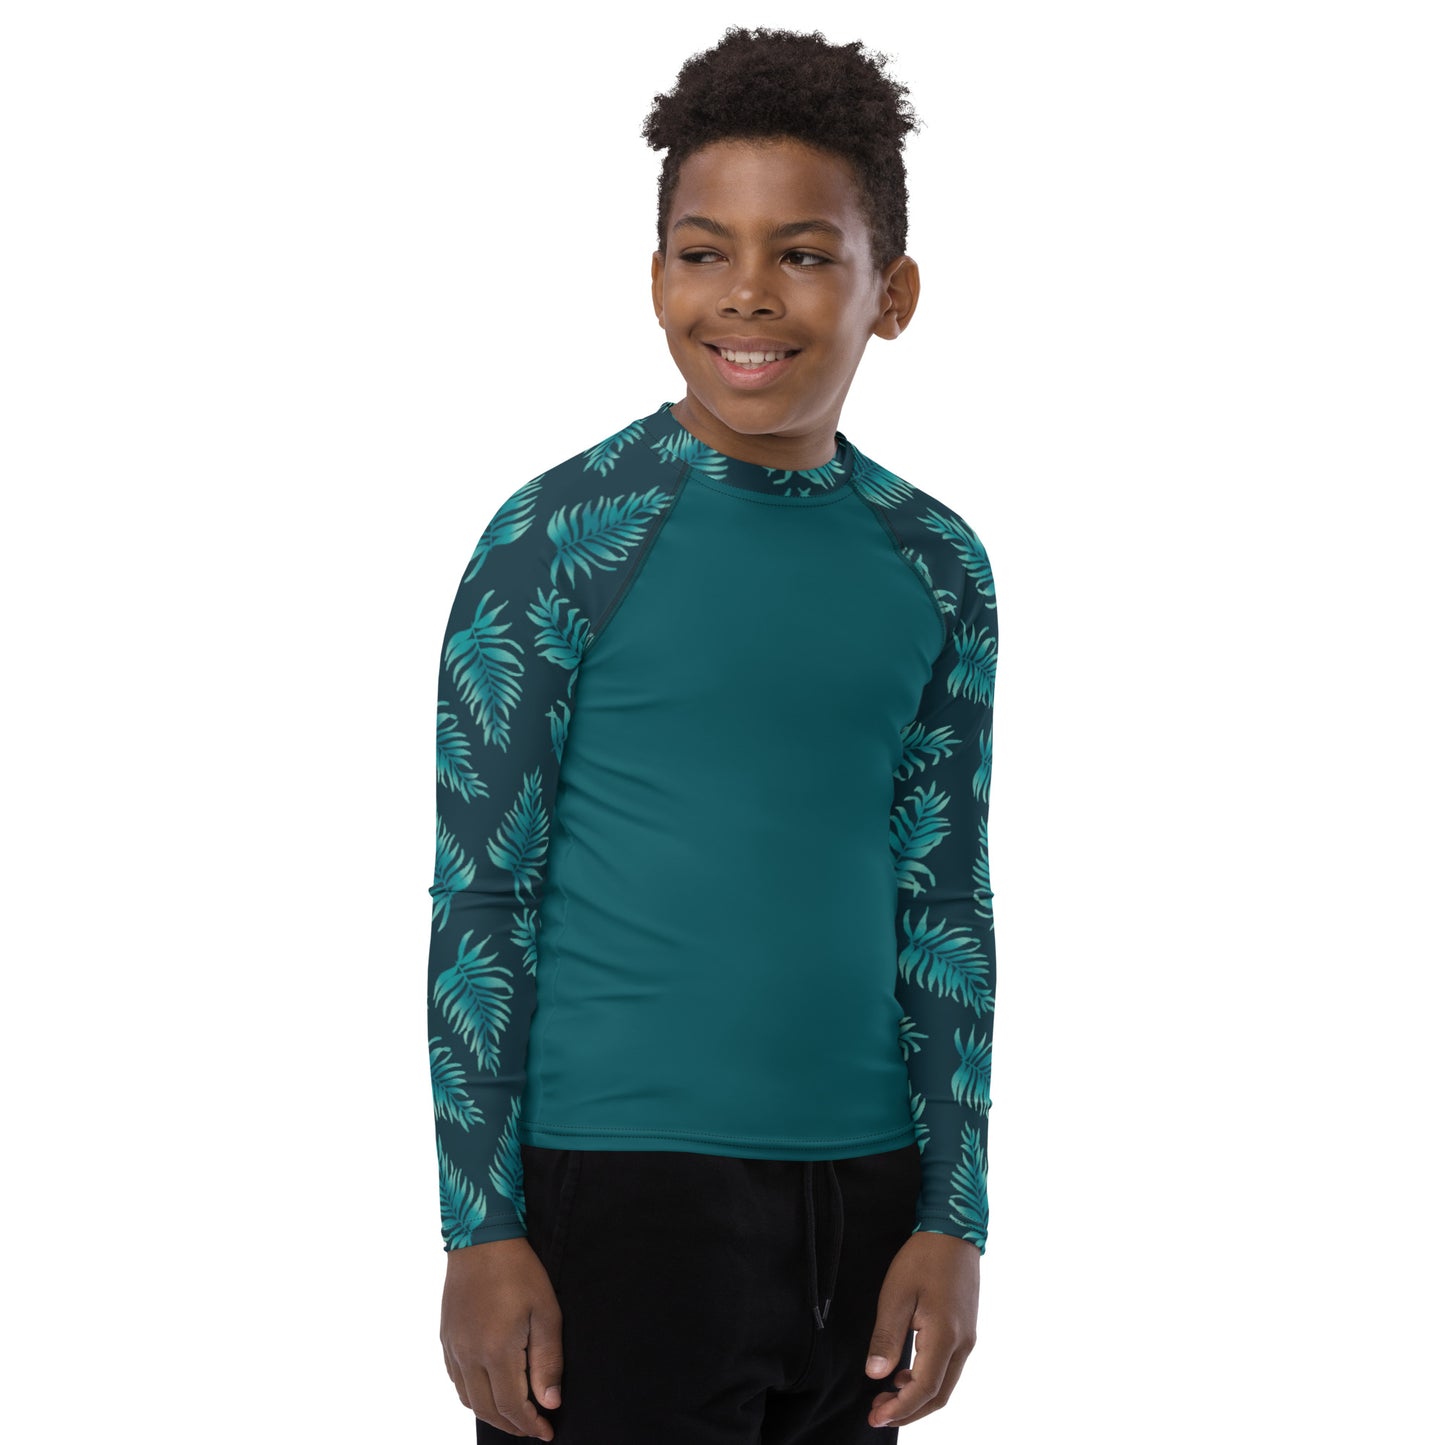 Youth Rash Guard - Palm Leaves in Blue Ombre